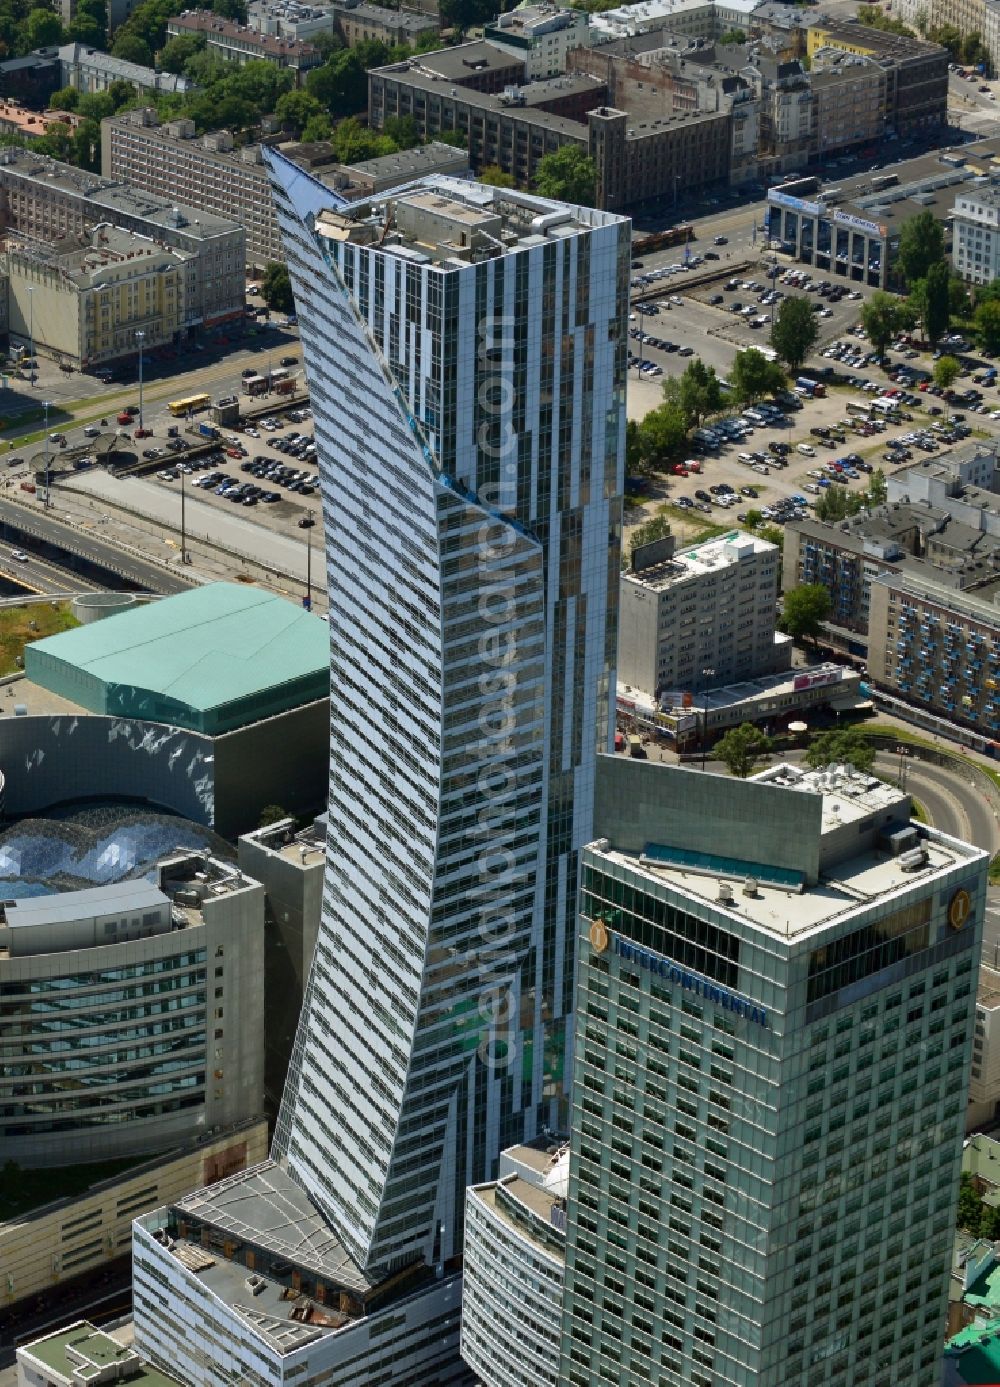 Aerial photograph Warschau - High-rise building Zlota 44 in the city center of the skyline of Warsaw in Poland. The skyscraper was designed by Daniel Libeskind by ORCO PROPERTY GROUP, and serves as a residential and commercial construction with apartments in the center of the capital